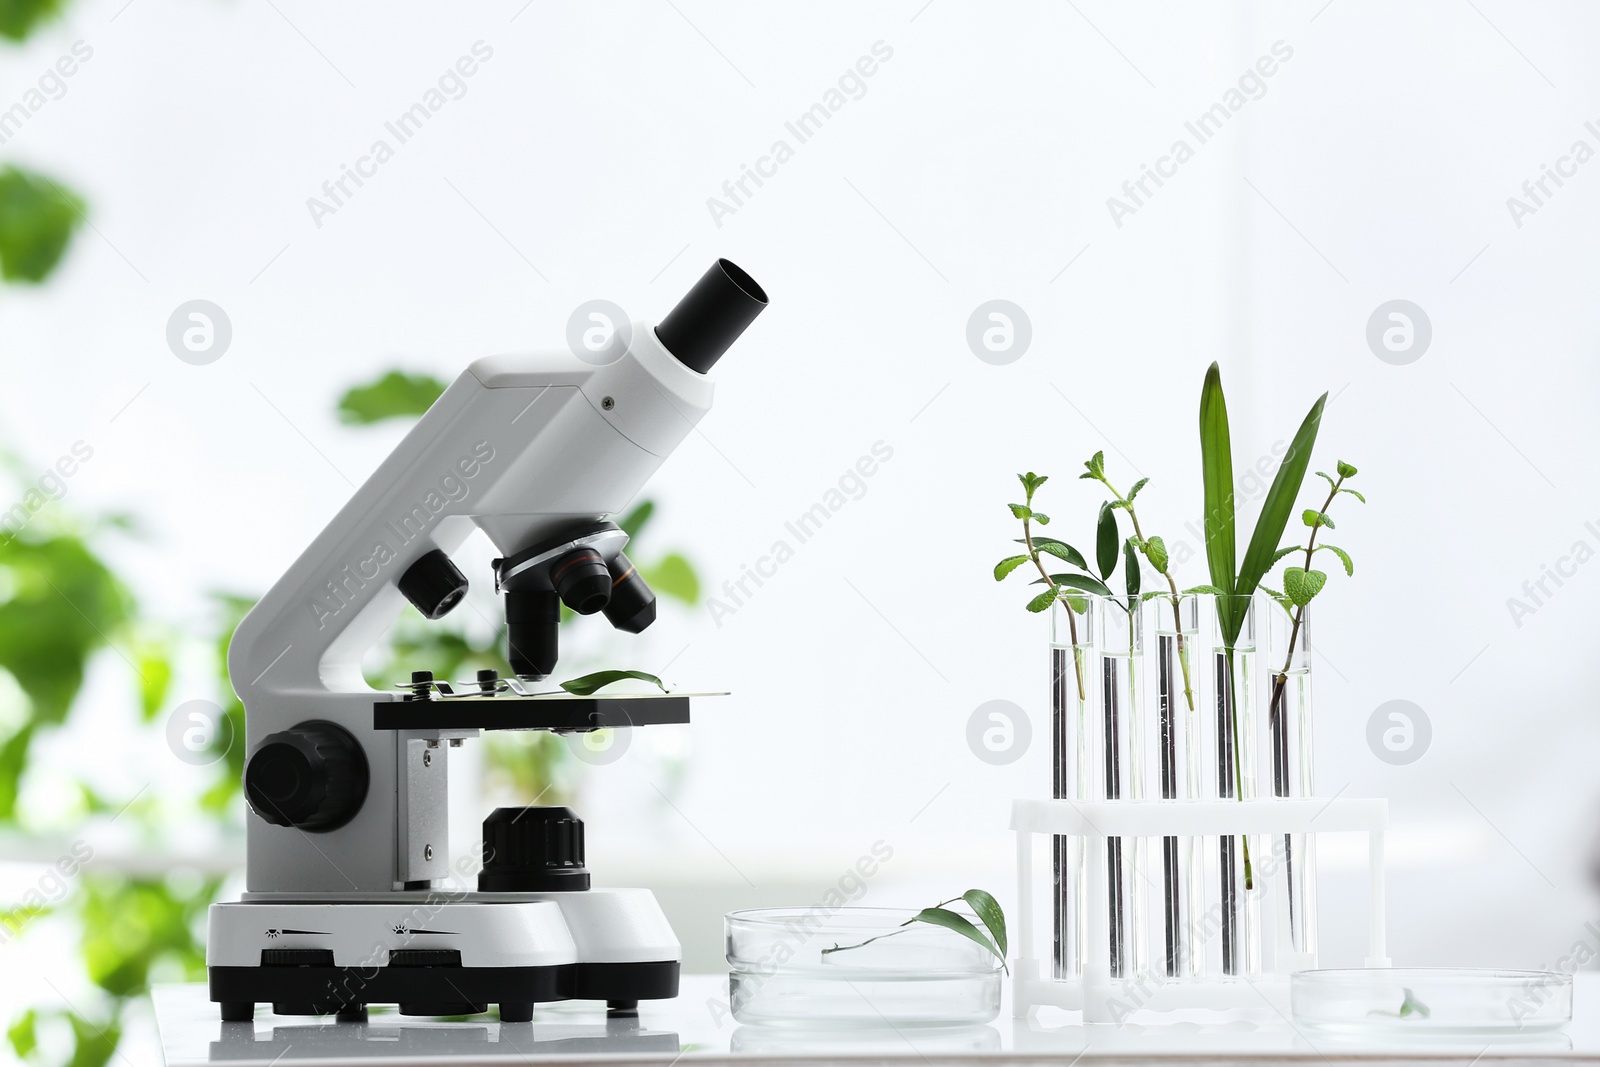 Photo of Laboratory glassware with different plants and microscope on table against blurred background. Chemistry research